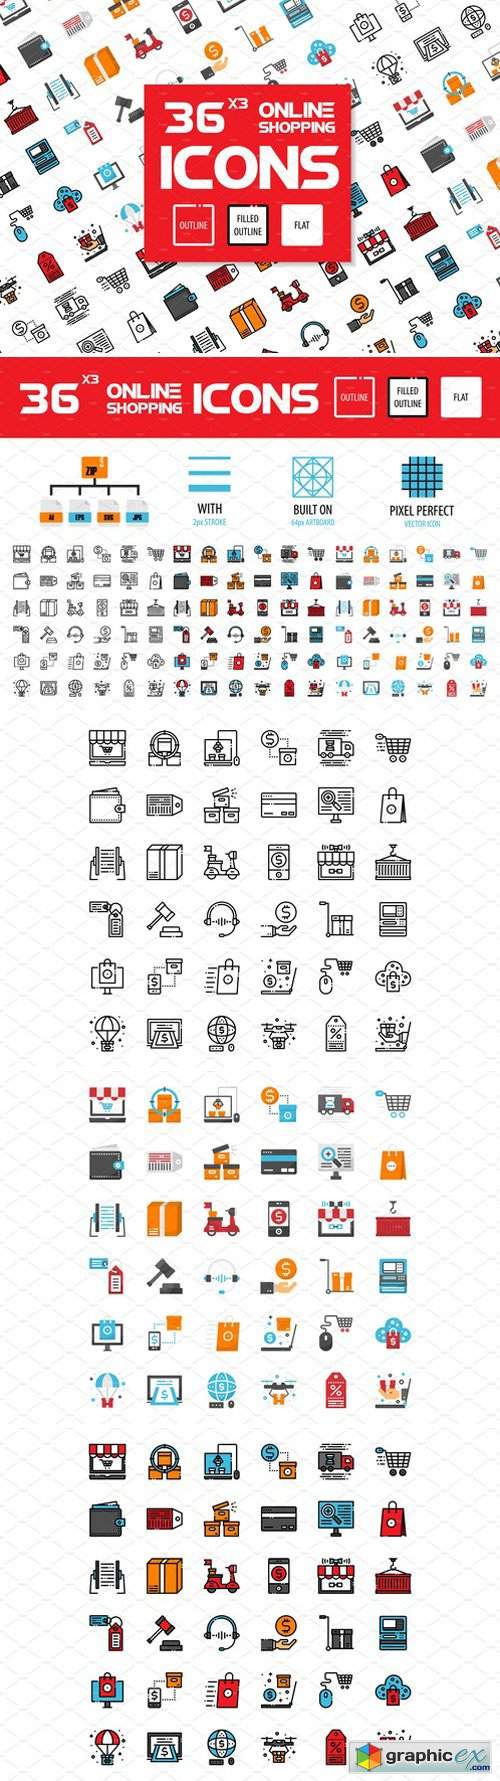 36x3 Online Shopping icons